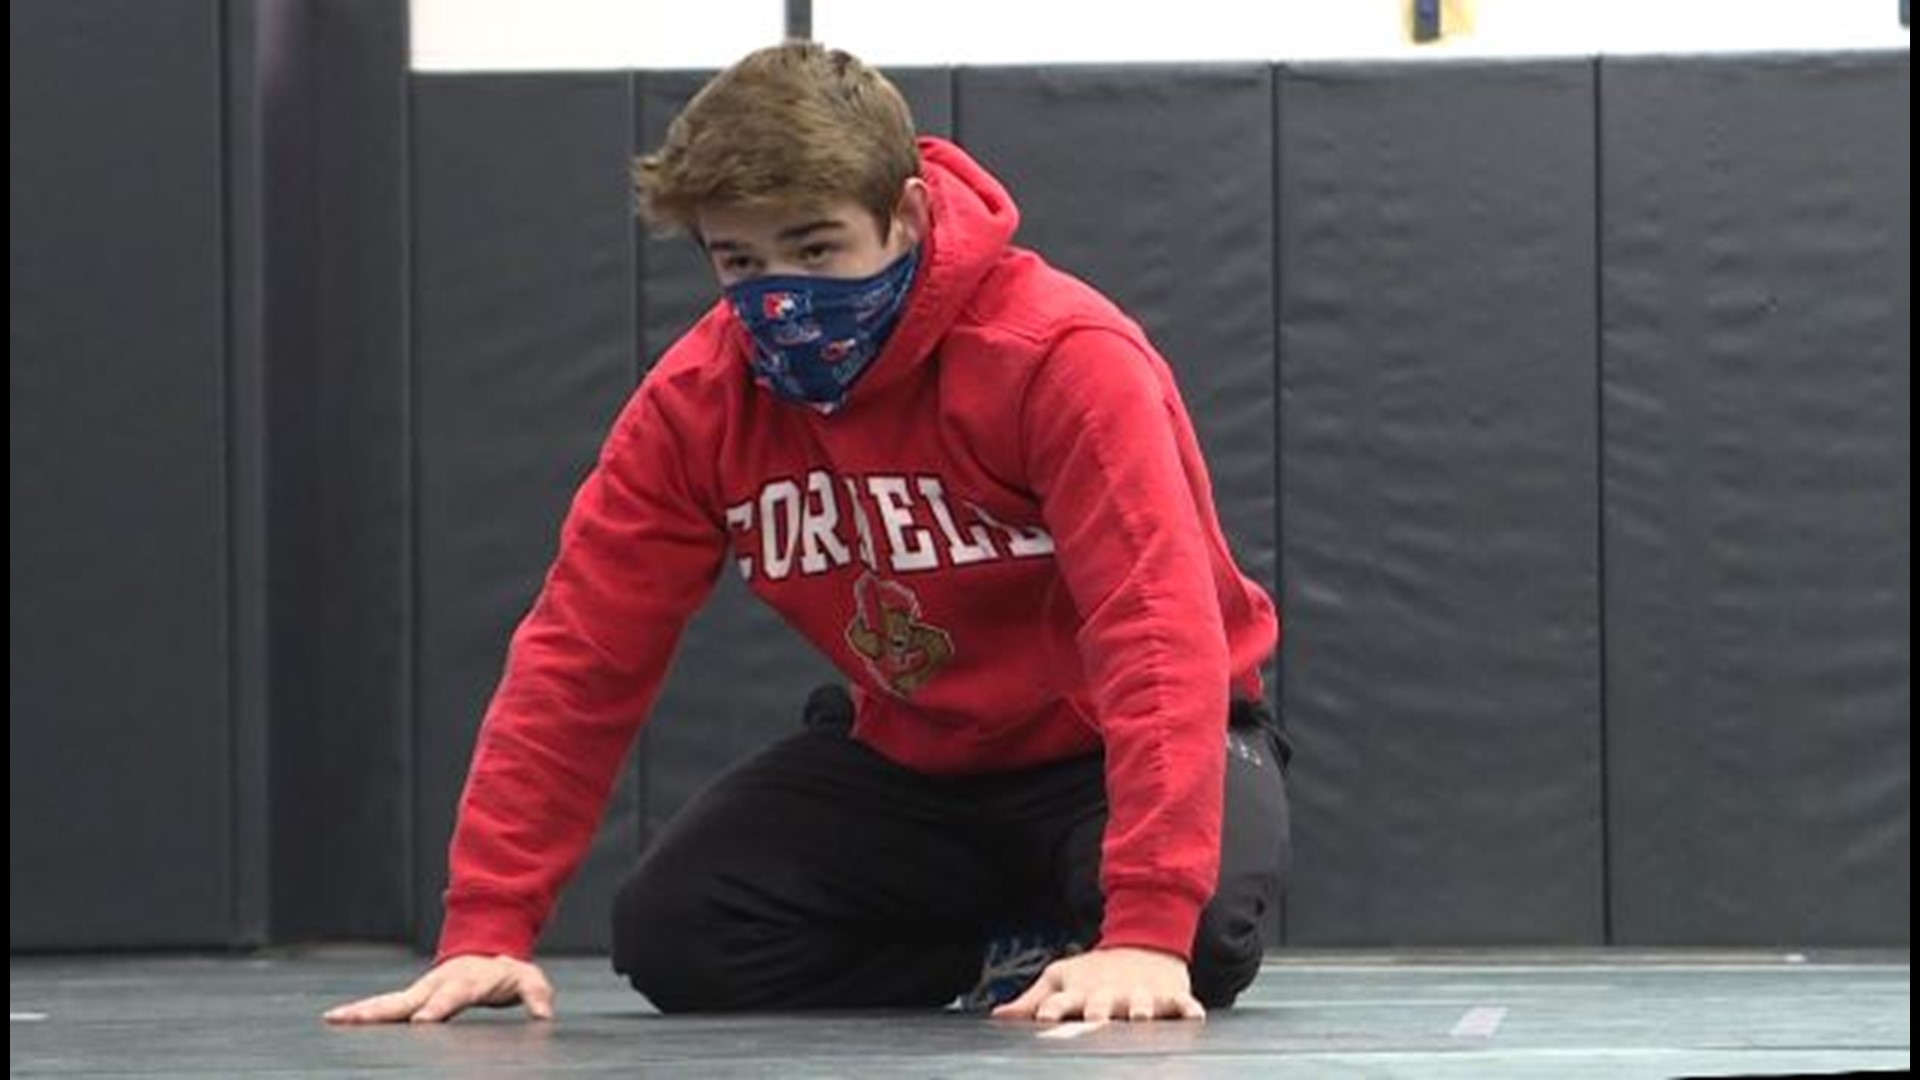 Three-time 5A Colorado High School wrestling champion Vince Cornella can attempt to win his fourth for his own high school, after COVID-restrictions lifted.